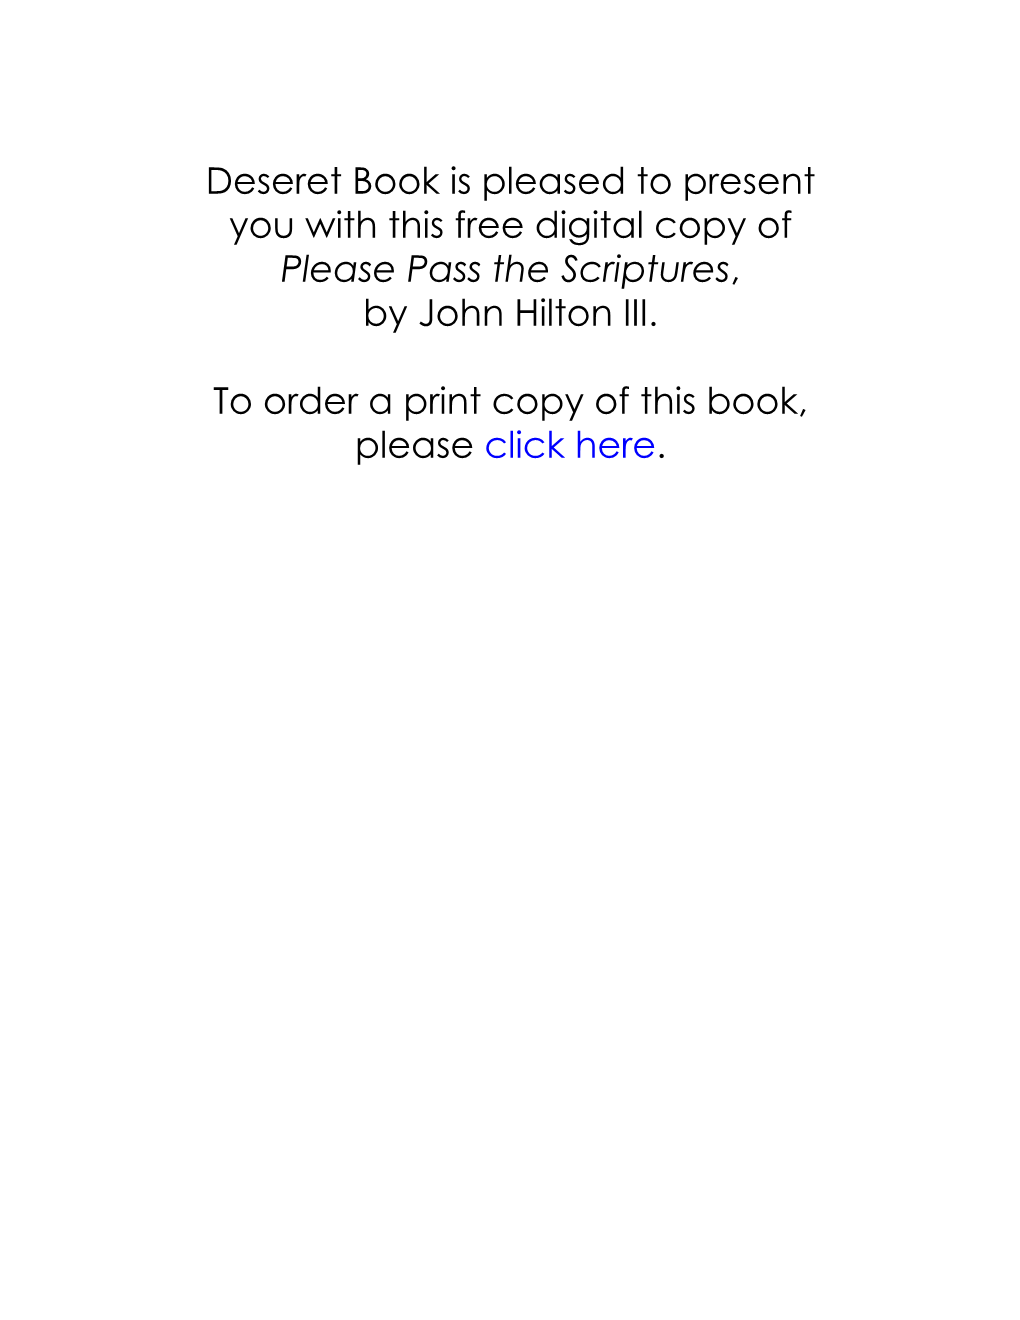 Deseret Book Is Pleased to Present You with This Free Digital Copy of Please Pass the Scriptures, by John Hilton III. to Order